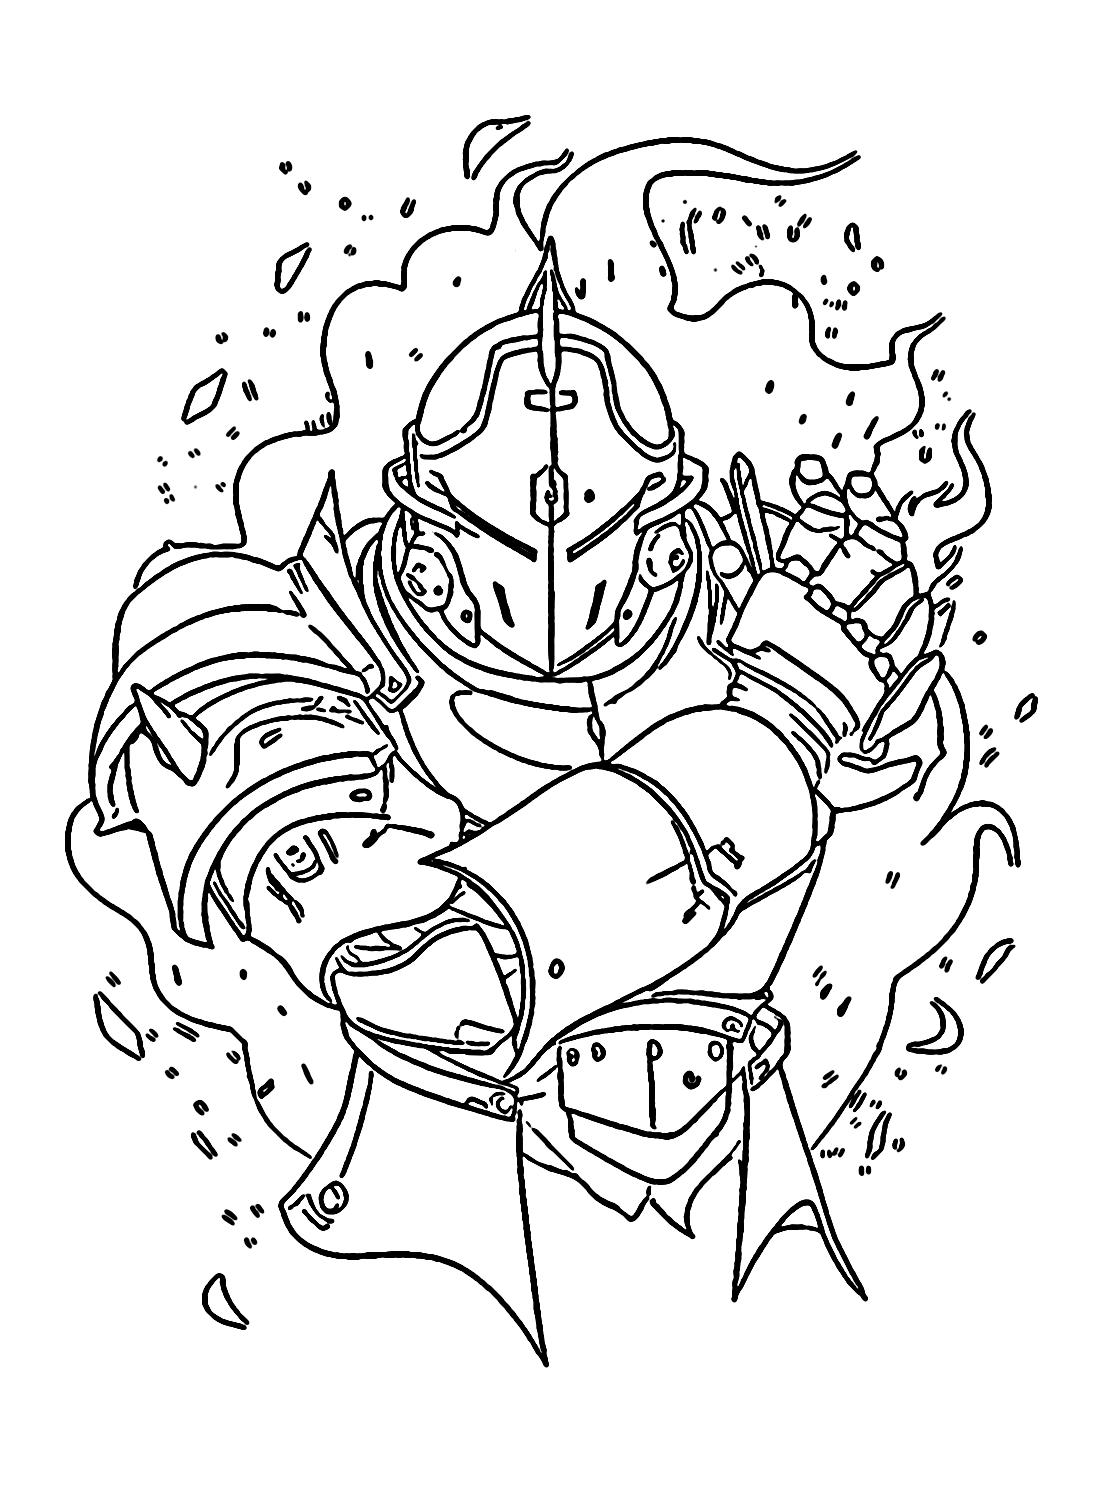 Alphonse Elric Coloring Page PDF from Alphonse Elric